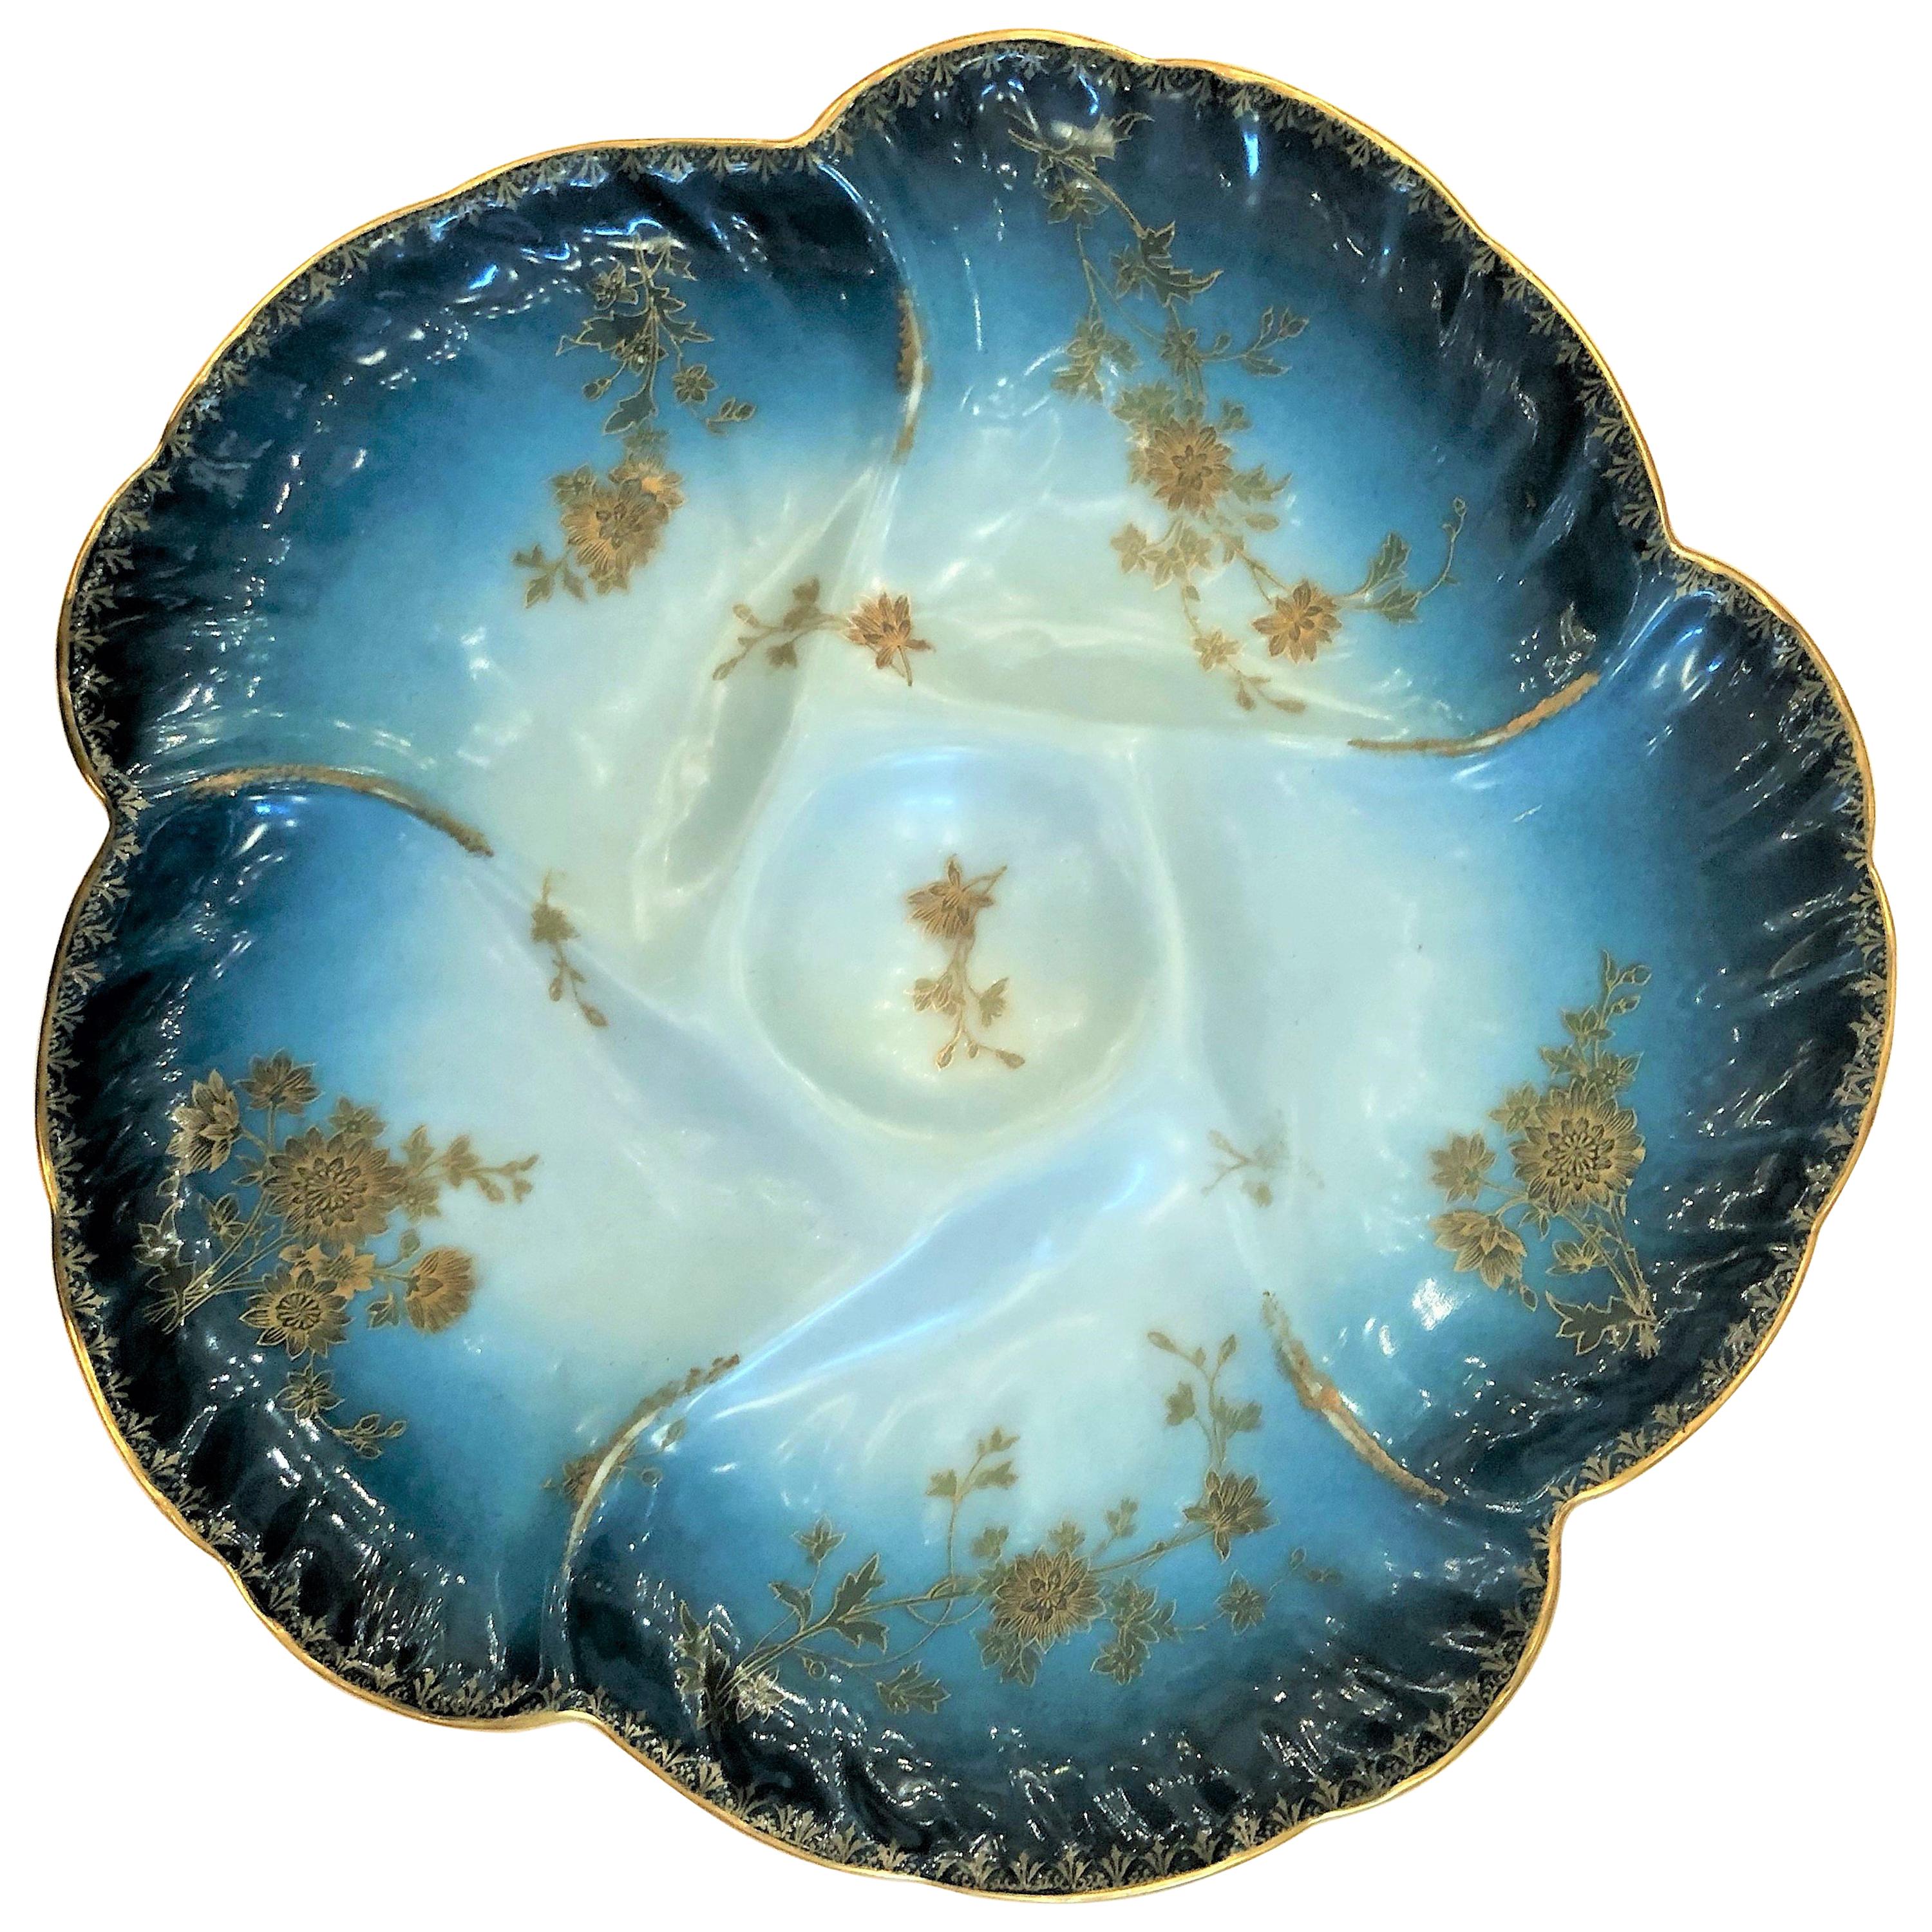 Antique French Limoges Hand-Painted Oyster Plate Signed "CFH / GDM, " circa 1890